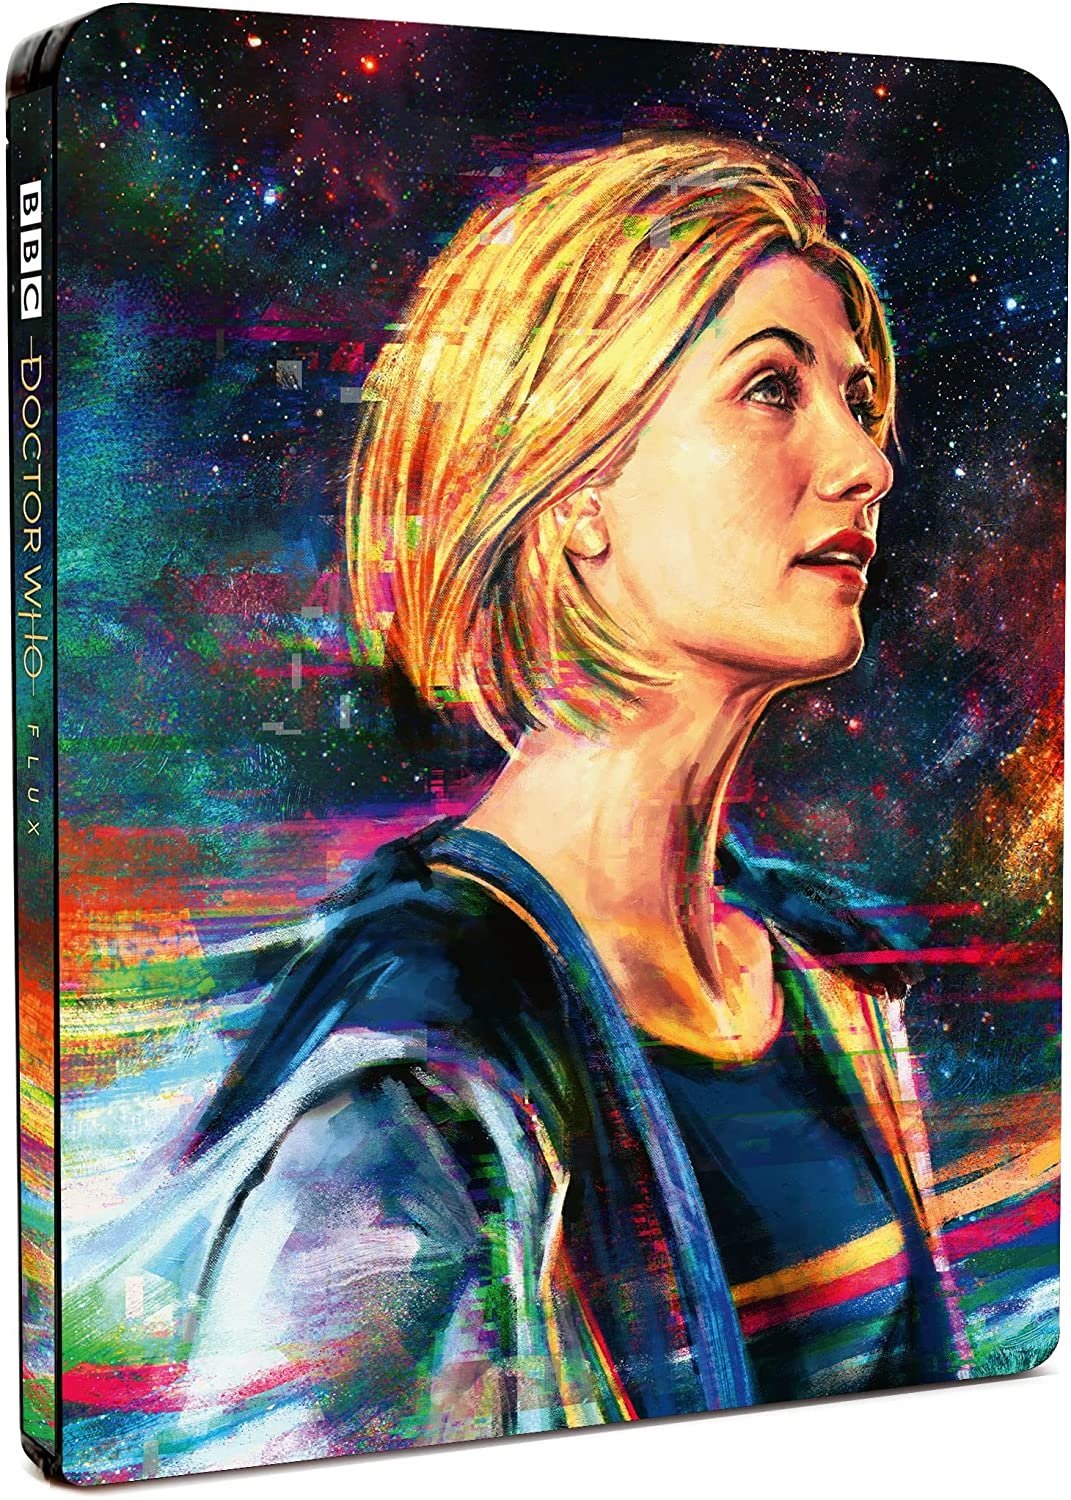 Flux on Blu-ray: Doctor Who Series 13 to be Released on Limited Edition Steelbook